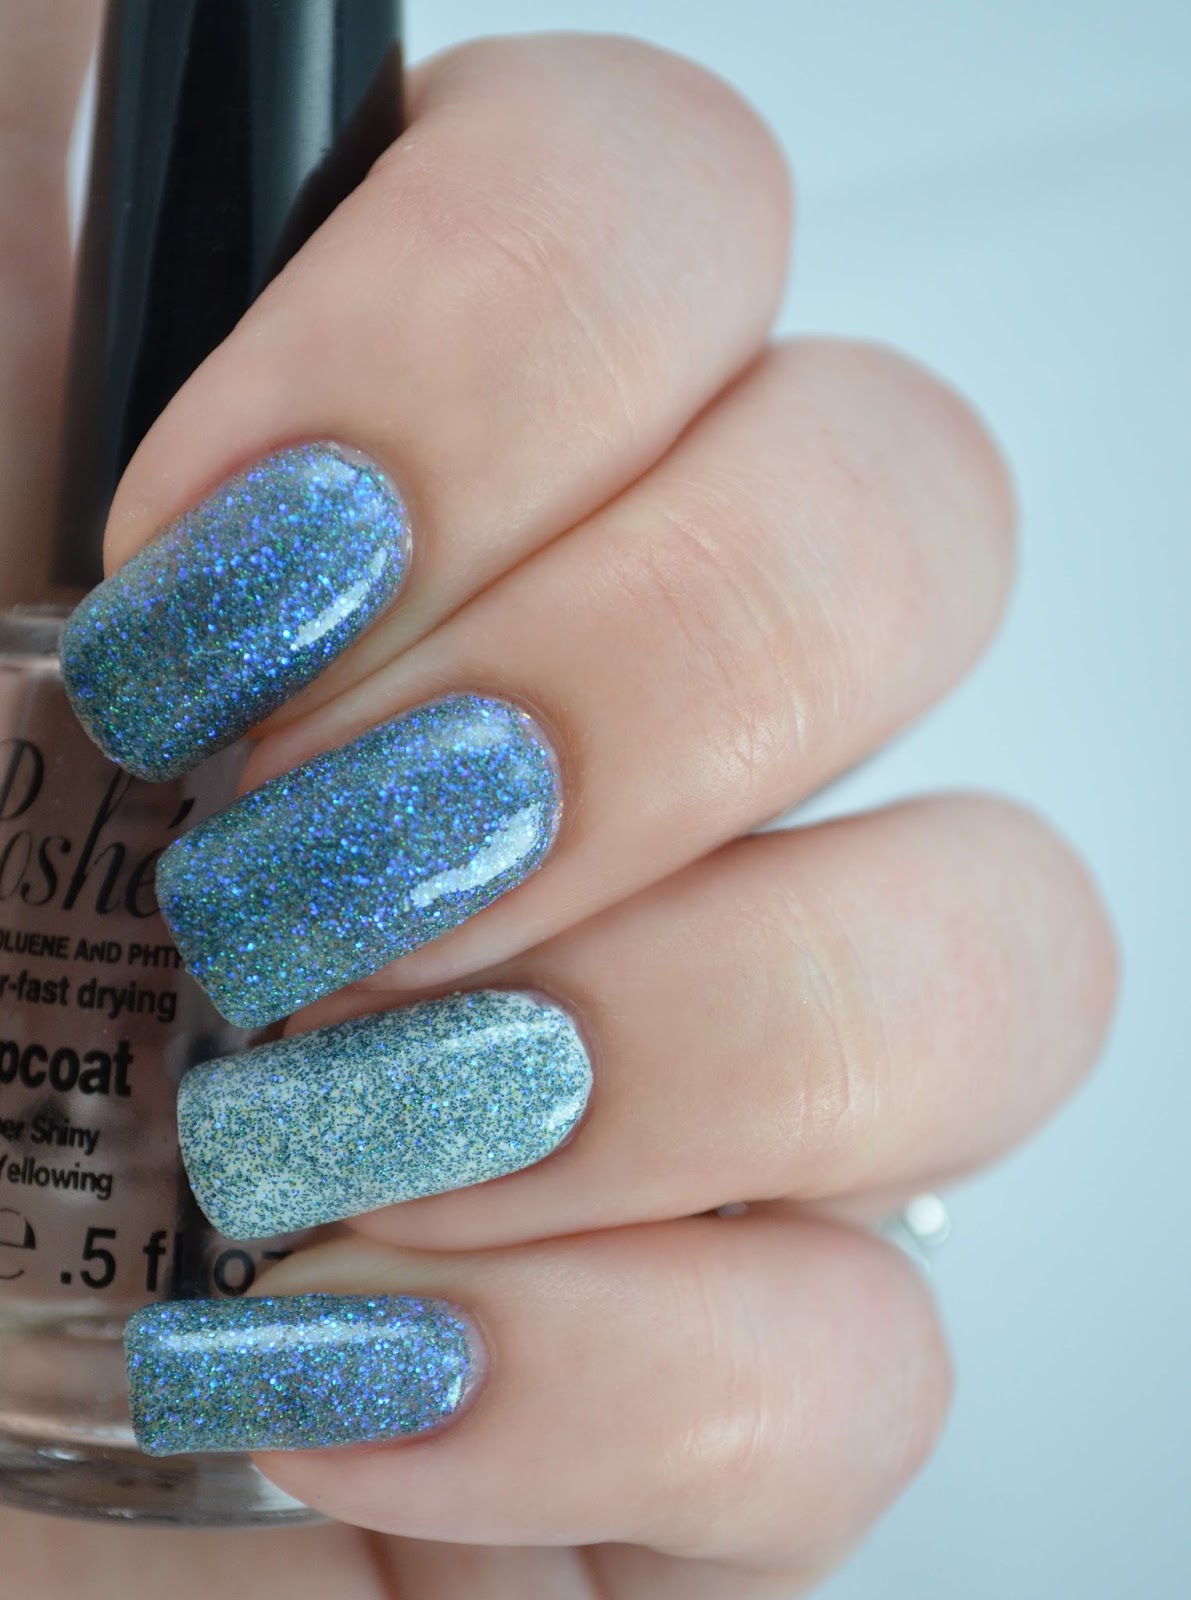 Reverie Nail Lacquer Mermaid Scales Summer 2014